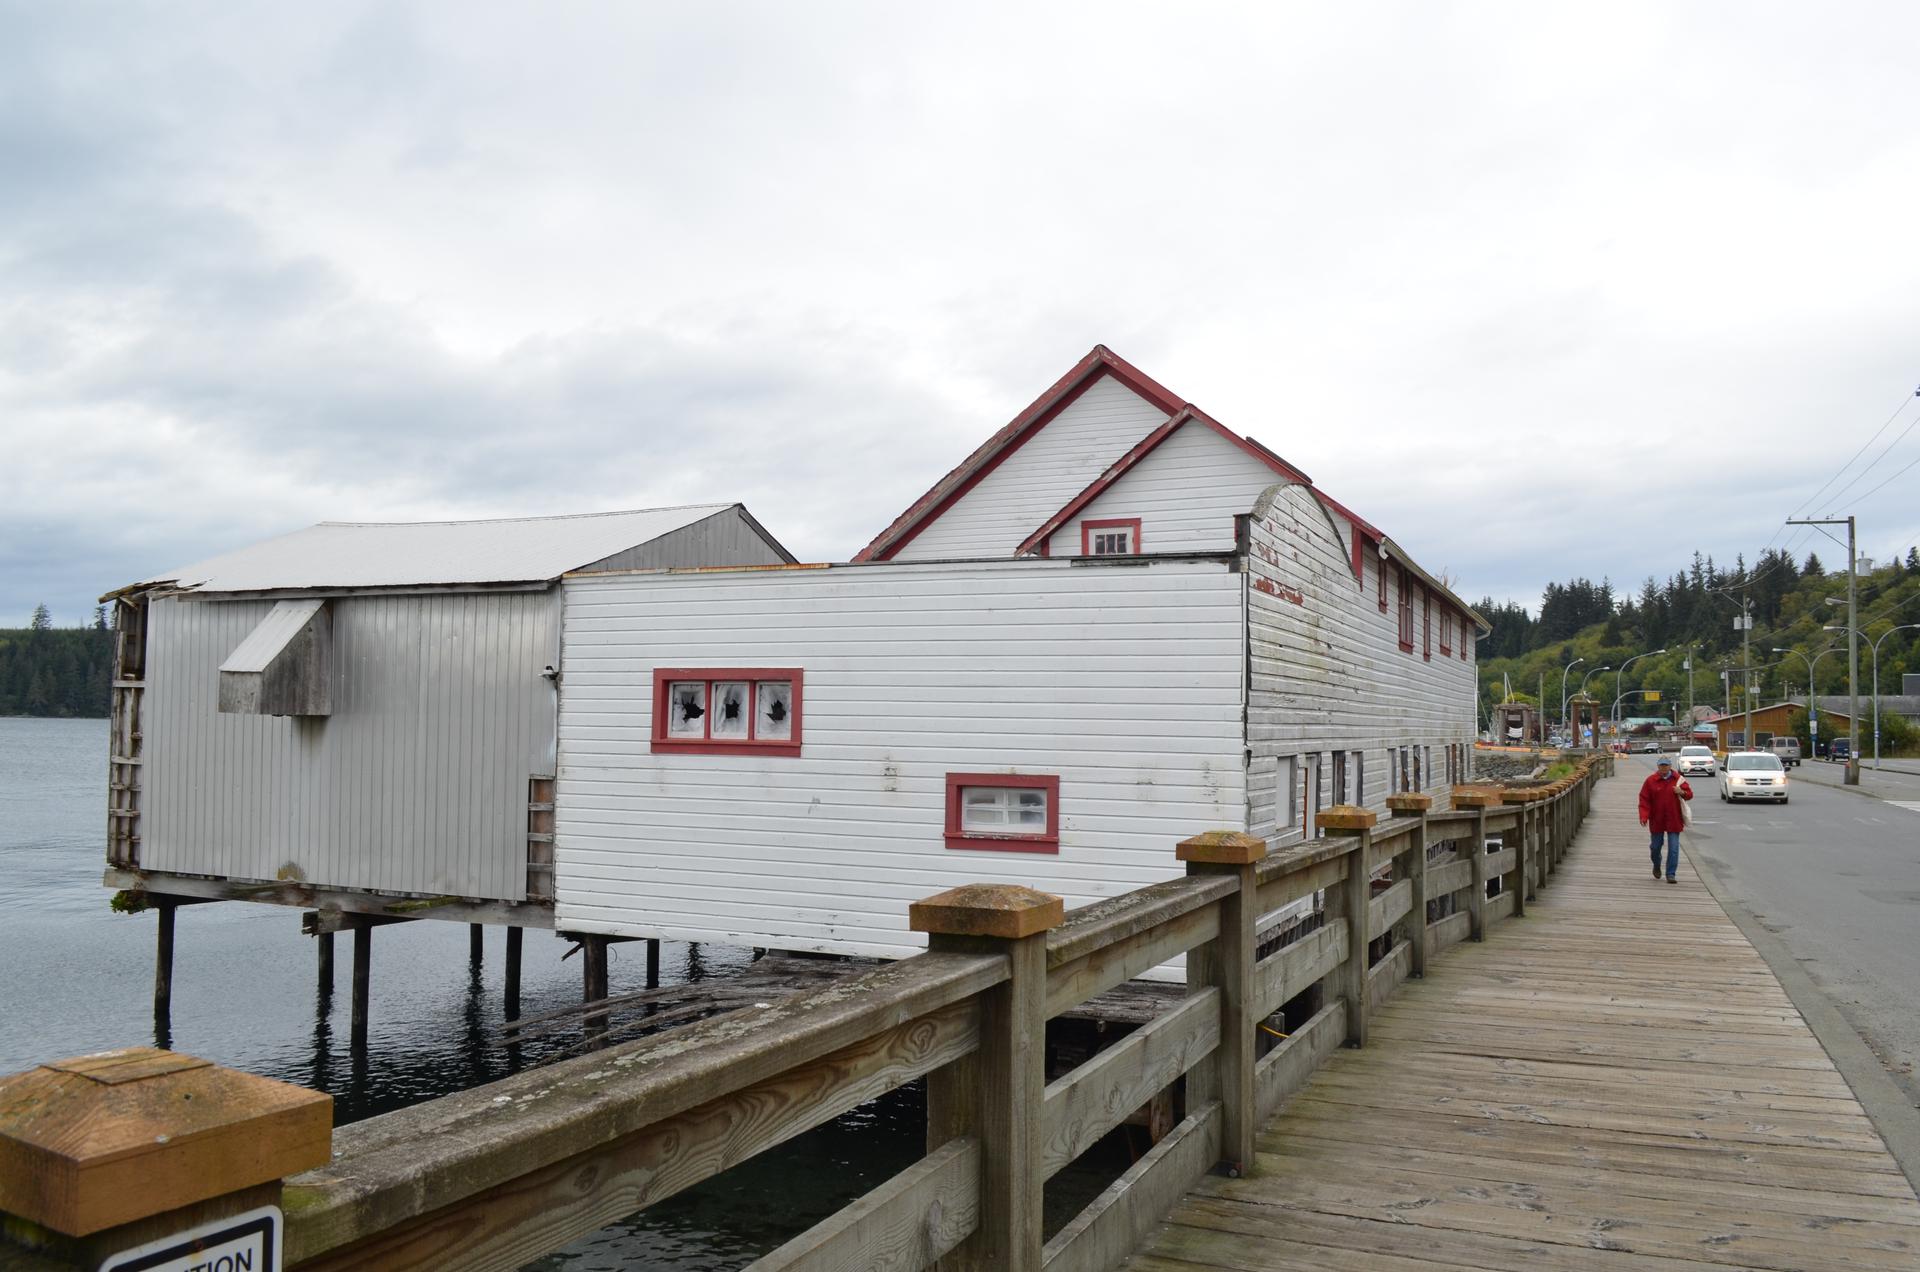 The biggest building in the town of Alert Bay, British Columbia is the closed salmon cannery.